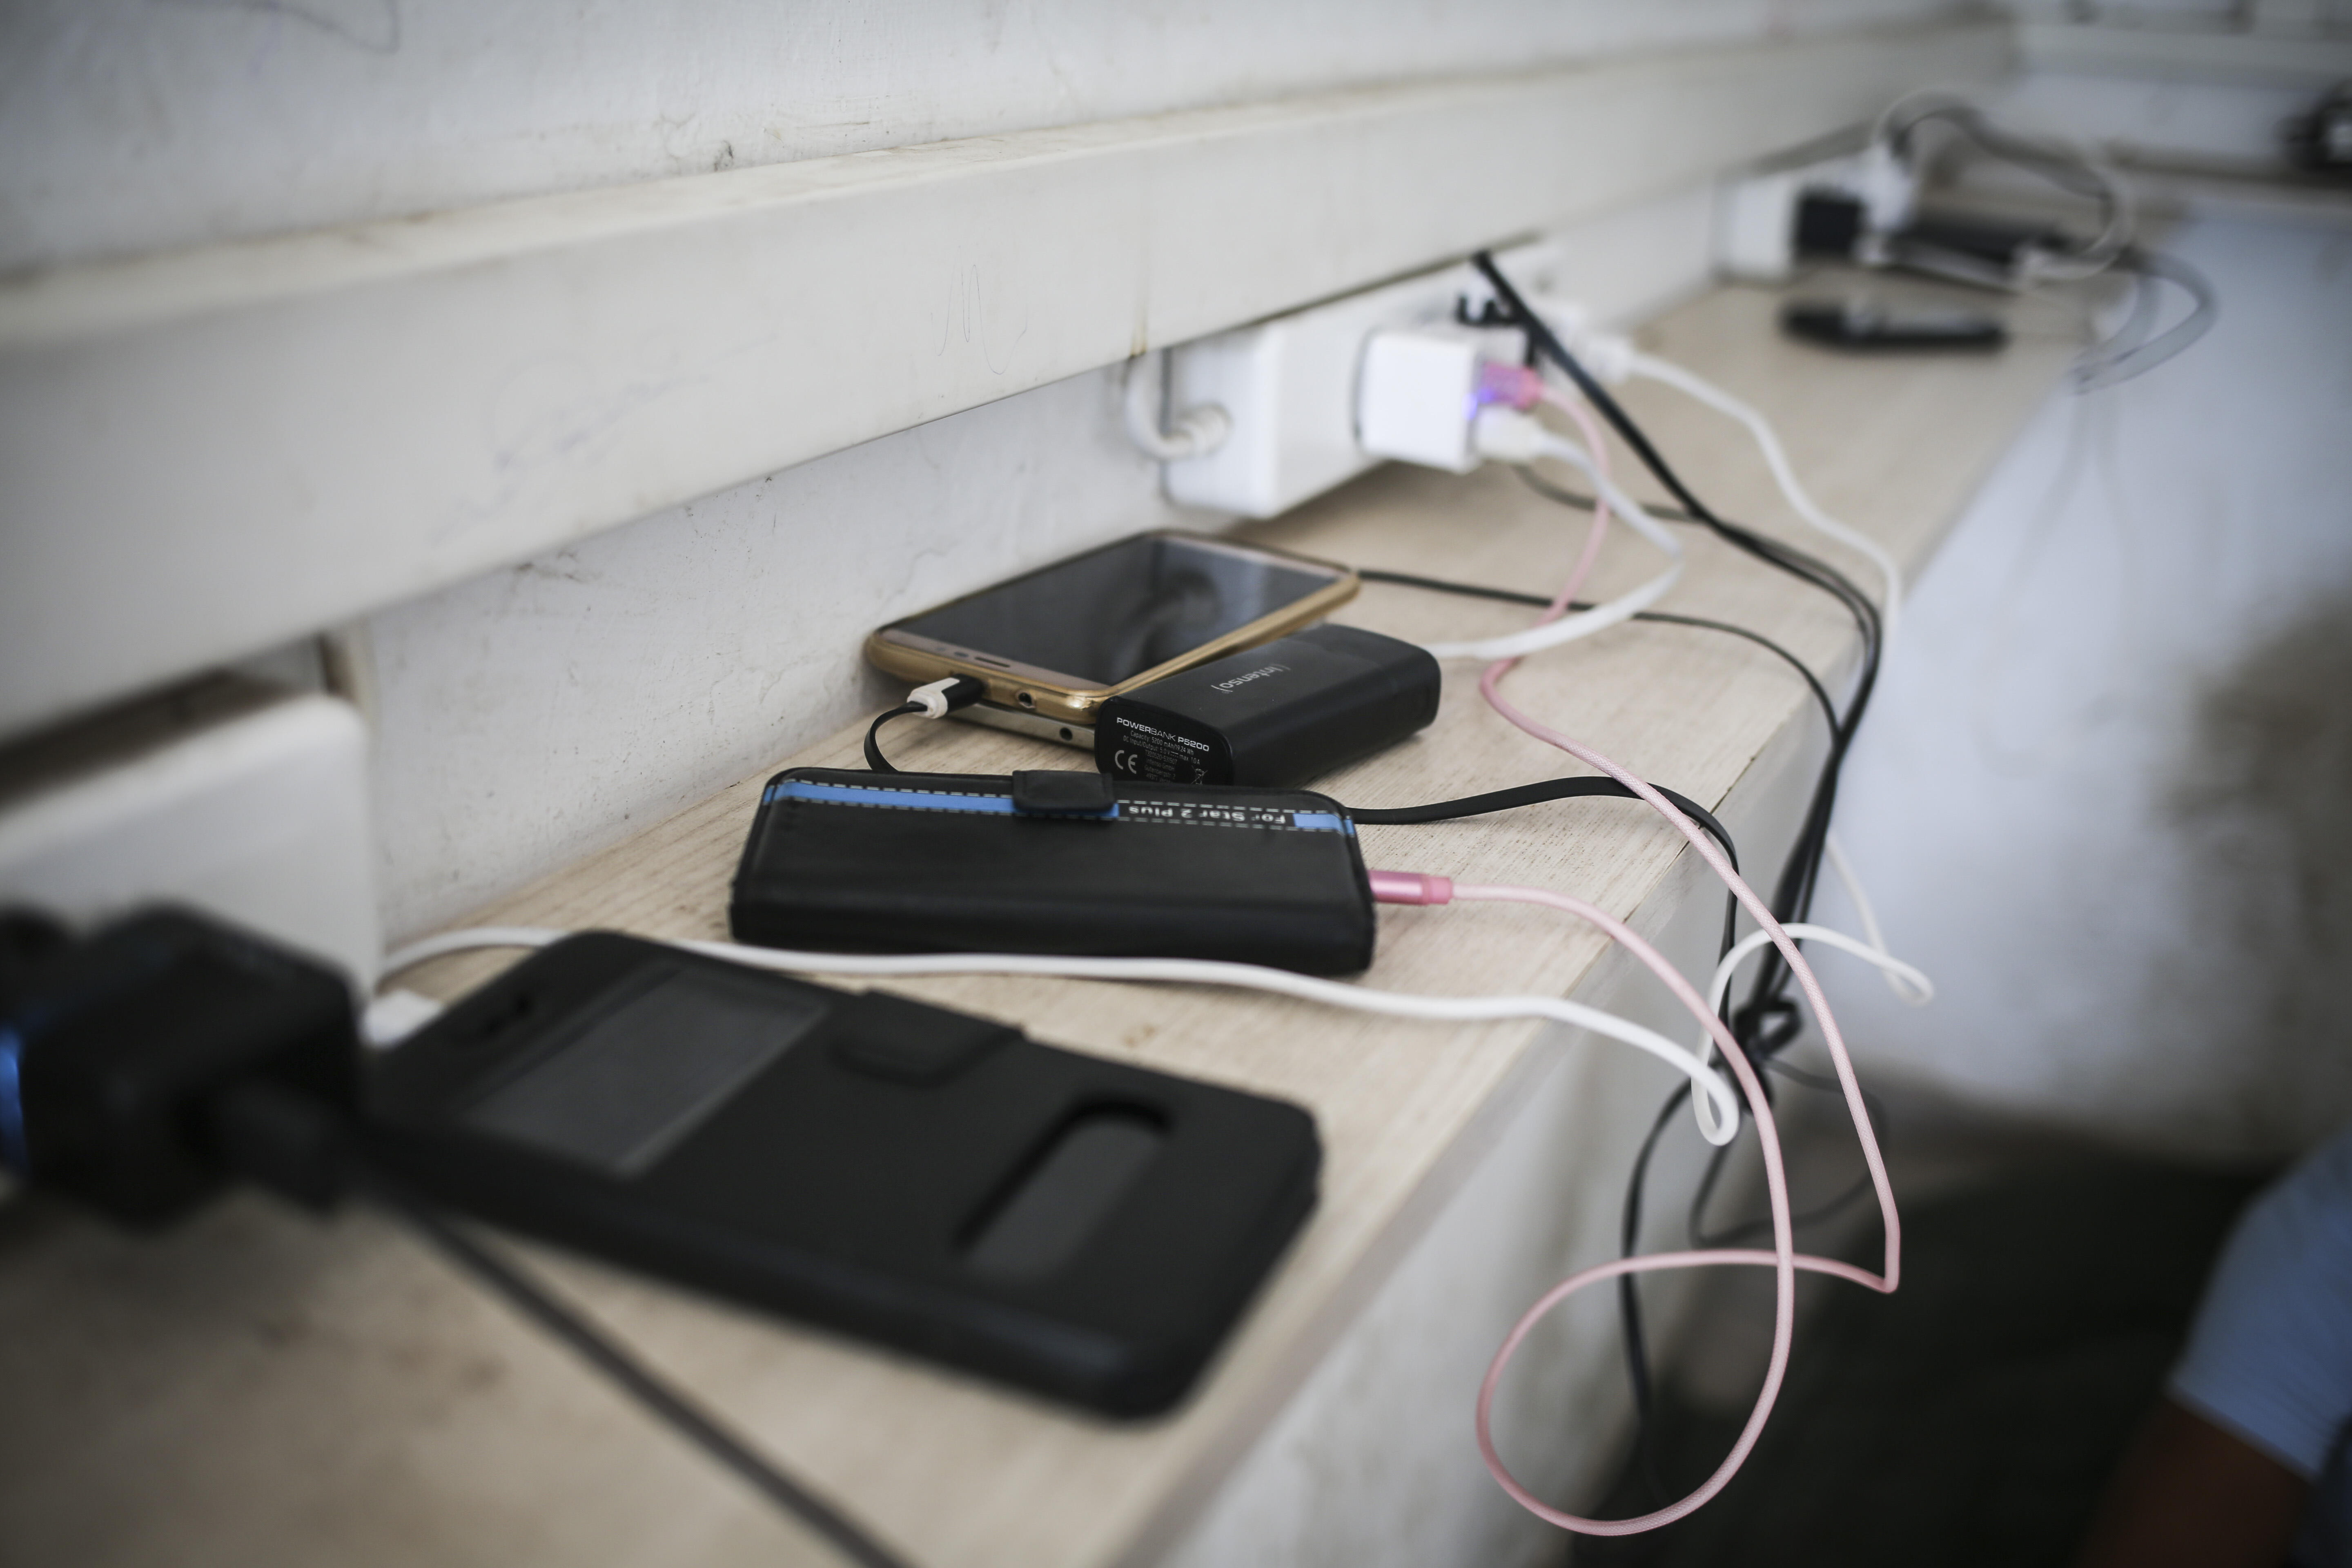 Refugees' ell phones and battery packs charge on a ledge in a refugee camp in Greece